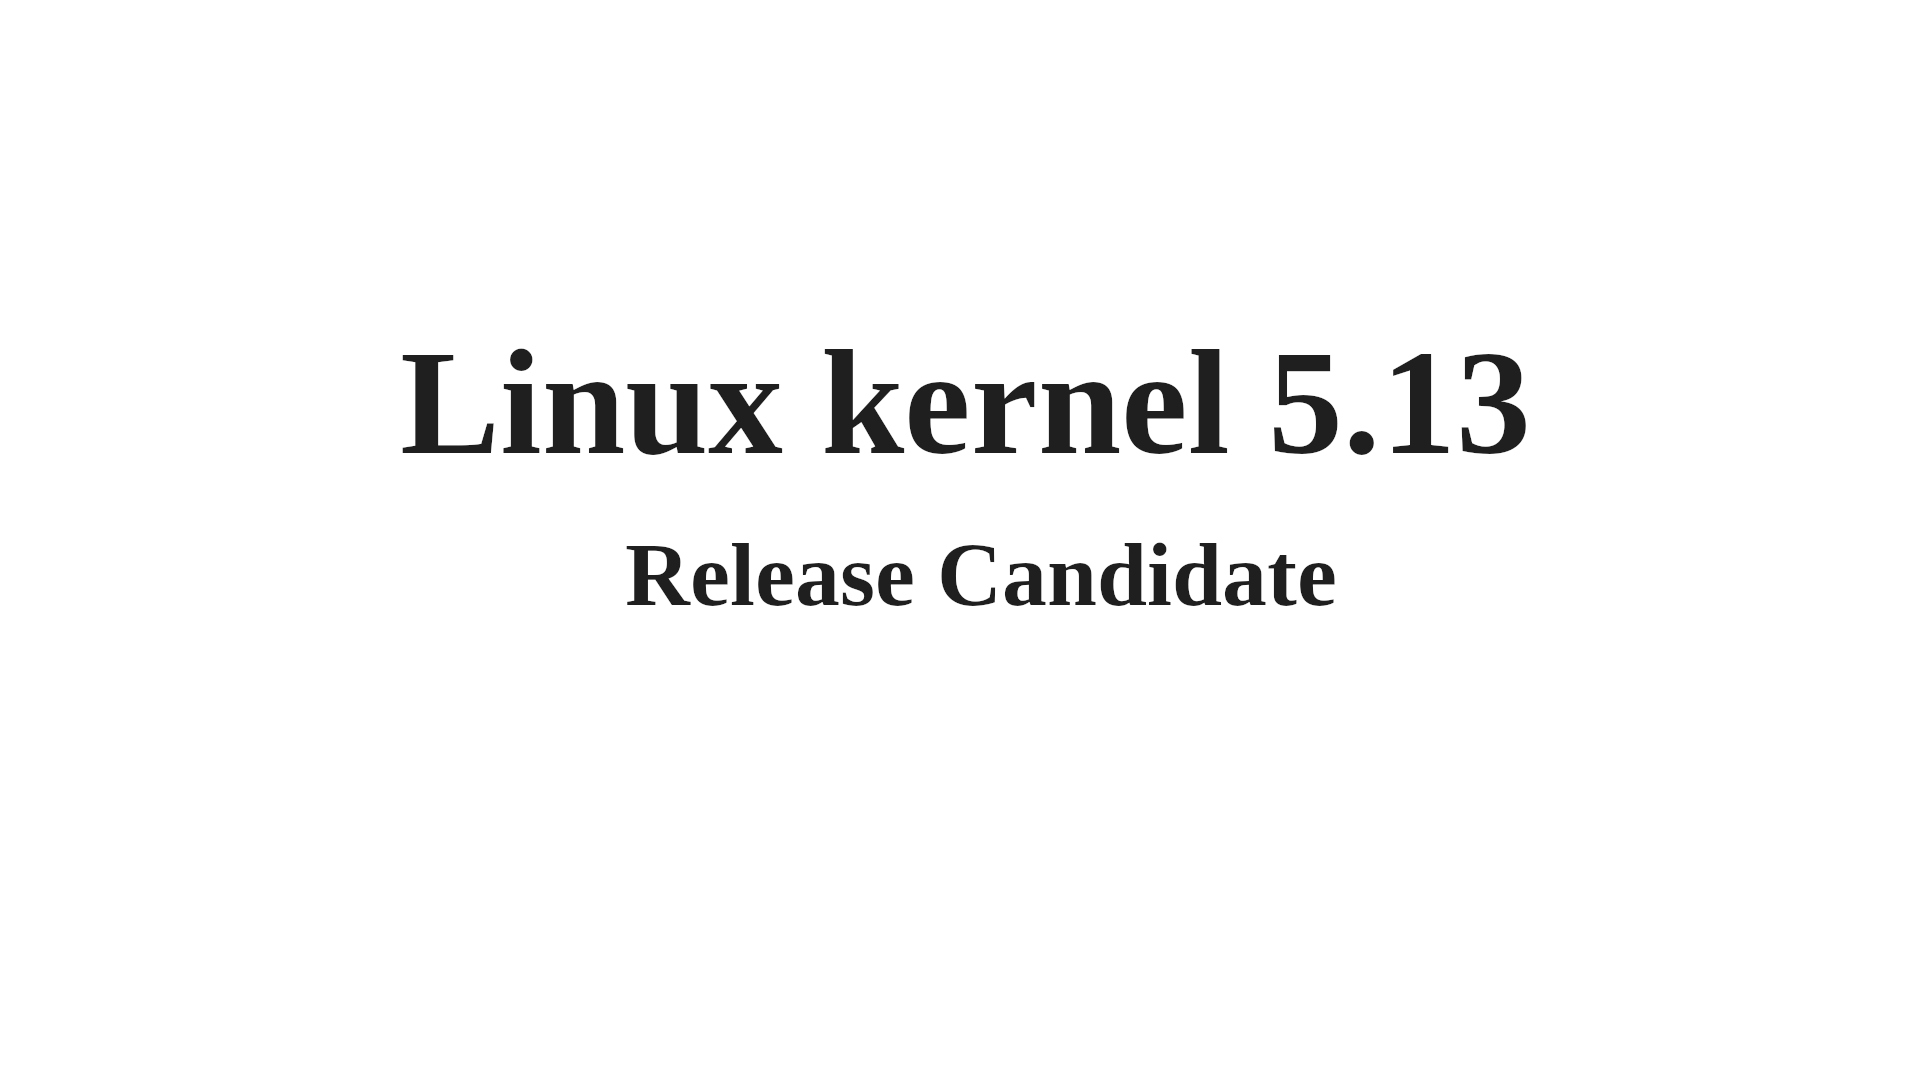 Linus Torvalds Announces First Linux Kernel 5.13 Release Candidate